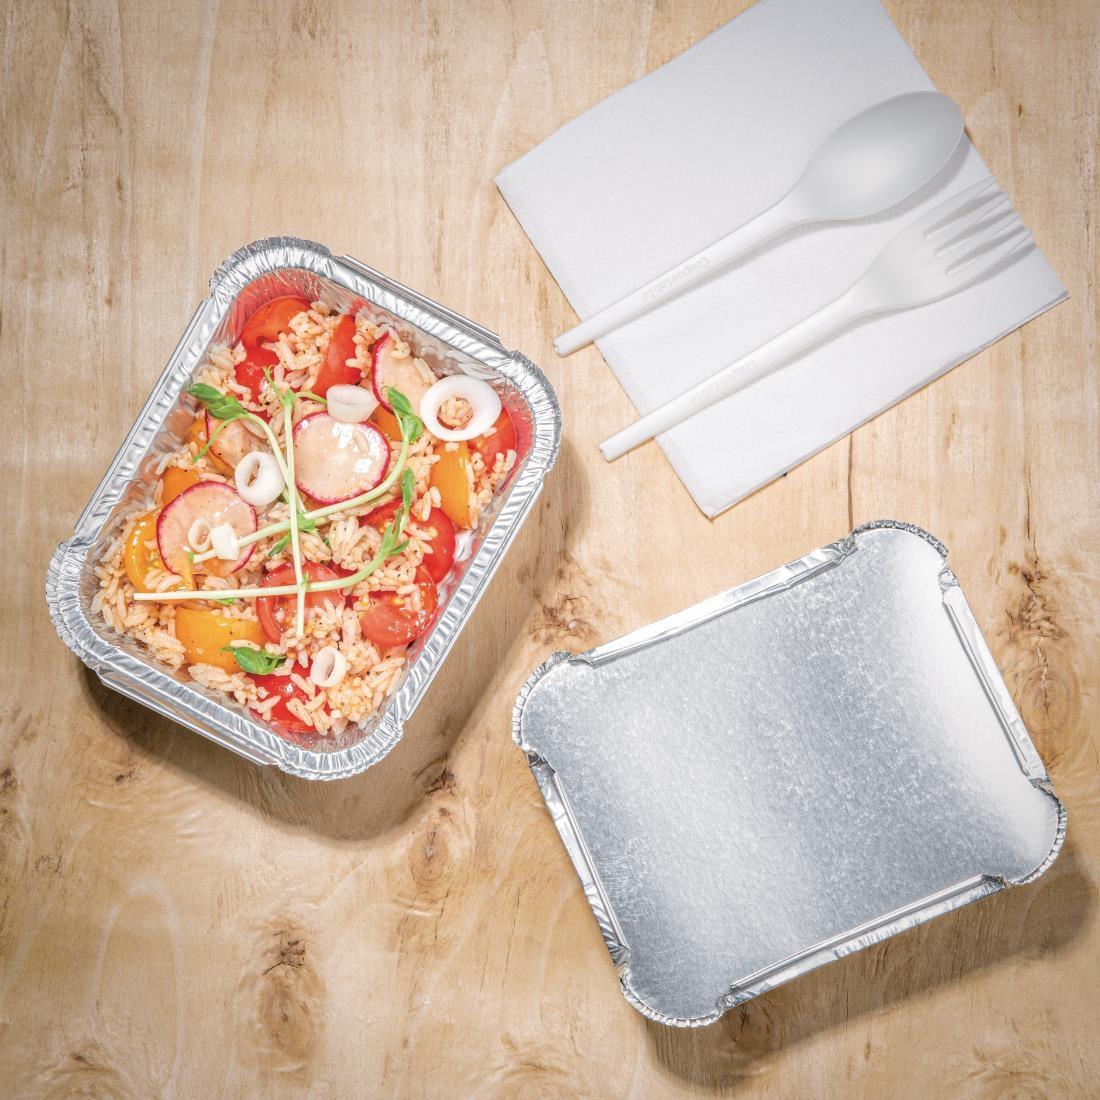 Fiesta Recyclable Waxed Lids for Medium Foil Containers (Pack of 500) - DA087  - 6